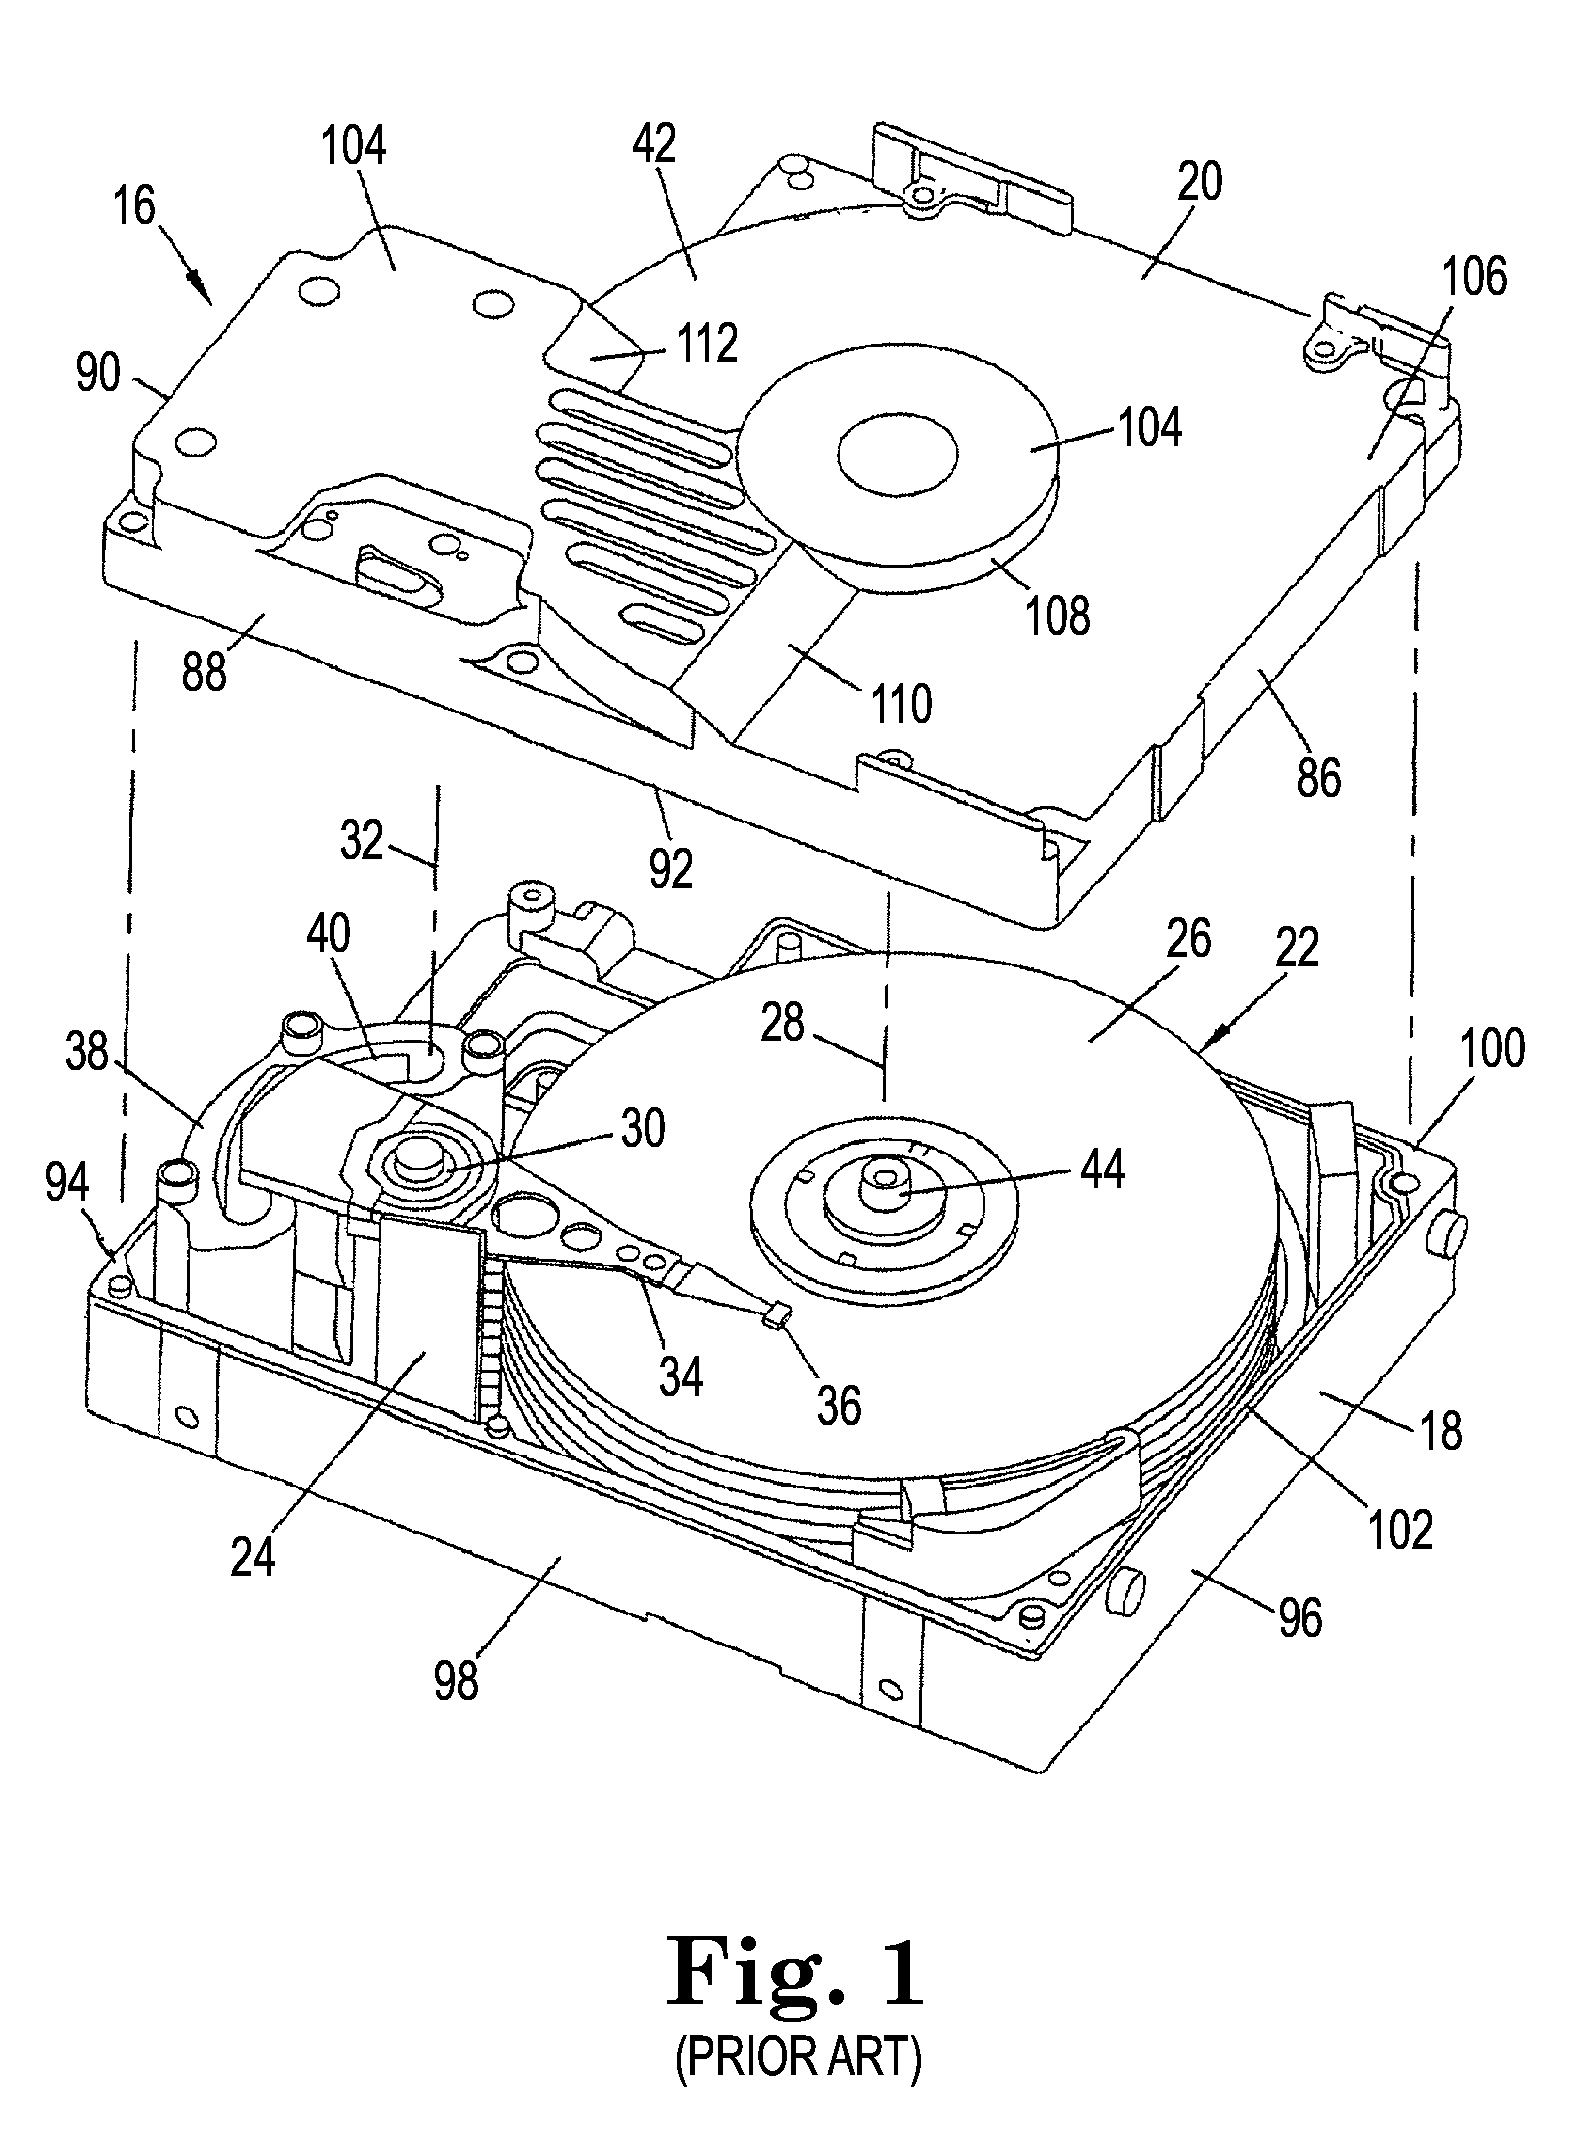 Coupling of Hard Disk Drive Housing and Related Methods